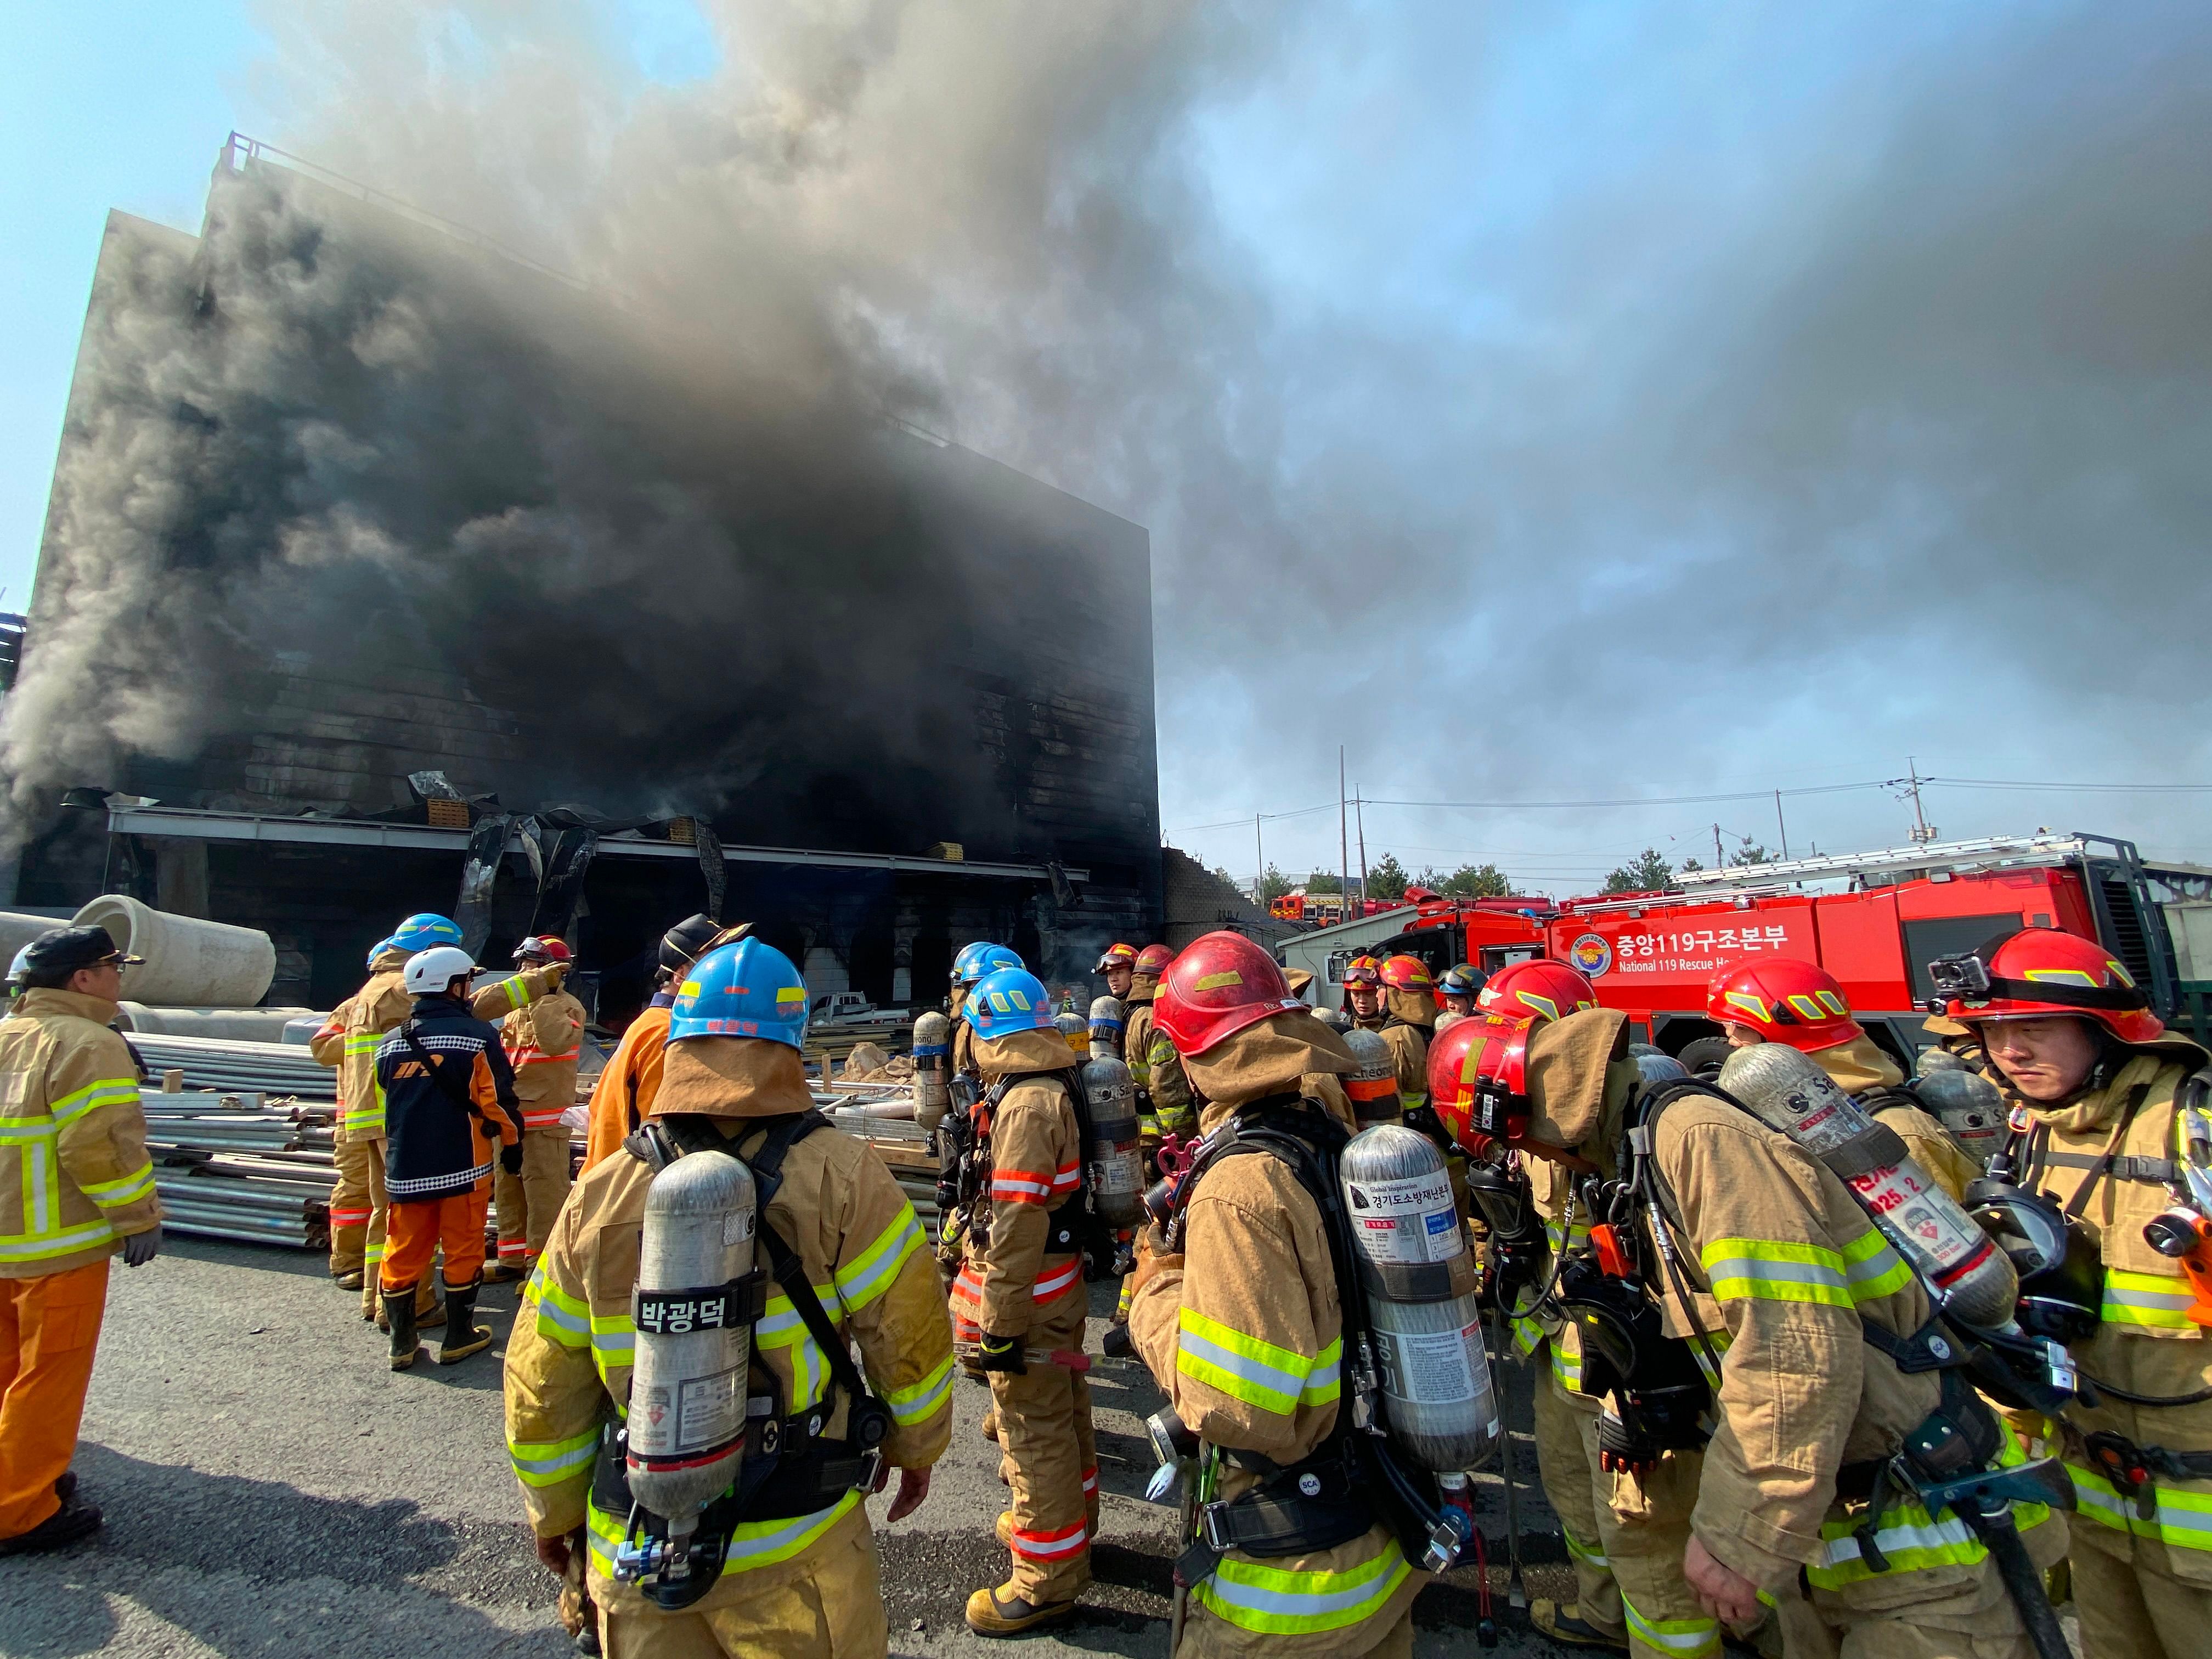 Gyeonggi Province Fire Services shows firefighters working at the scene of a fire at a warehouse in Icheon. - A fire at a warehouse in South Korea killed 25 people. (AFP Photo)